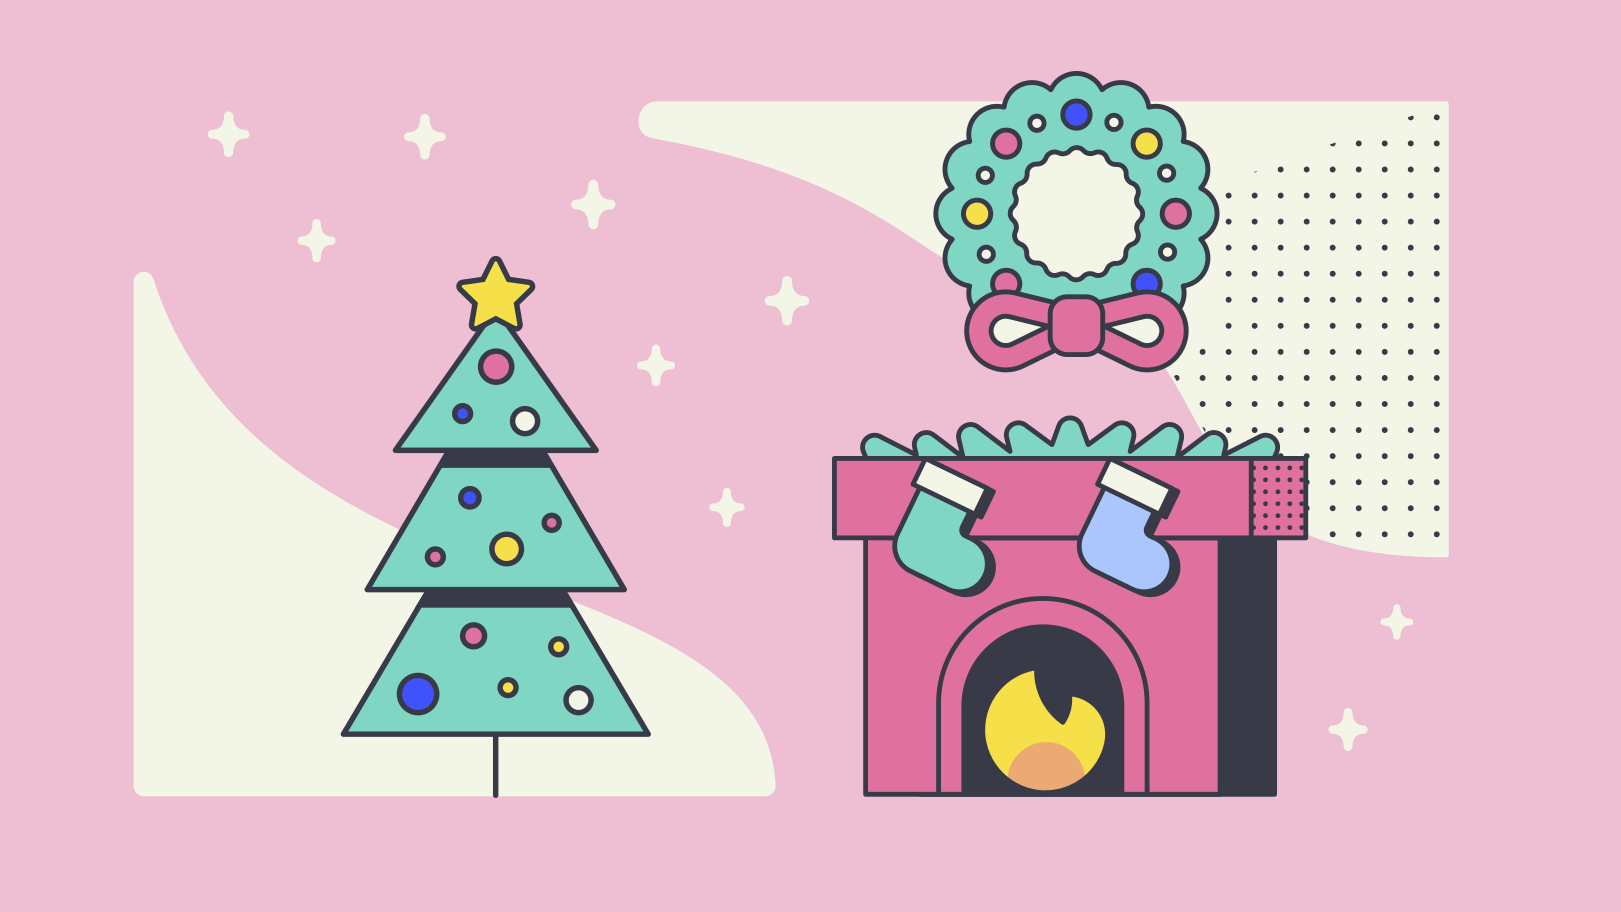 An Illustration of christmas | from https://icons8.com/illustrations